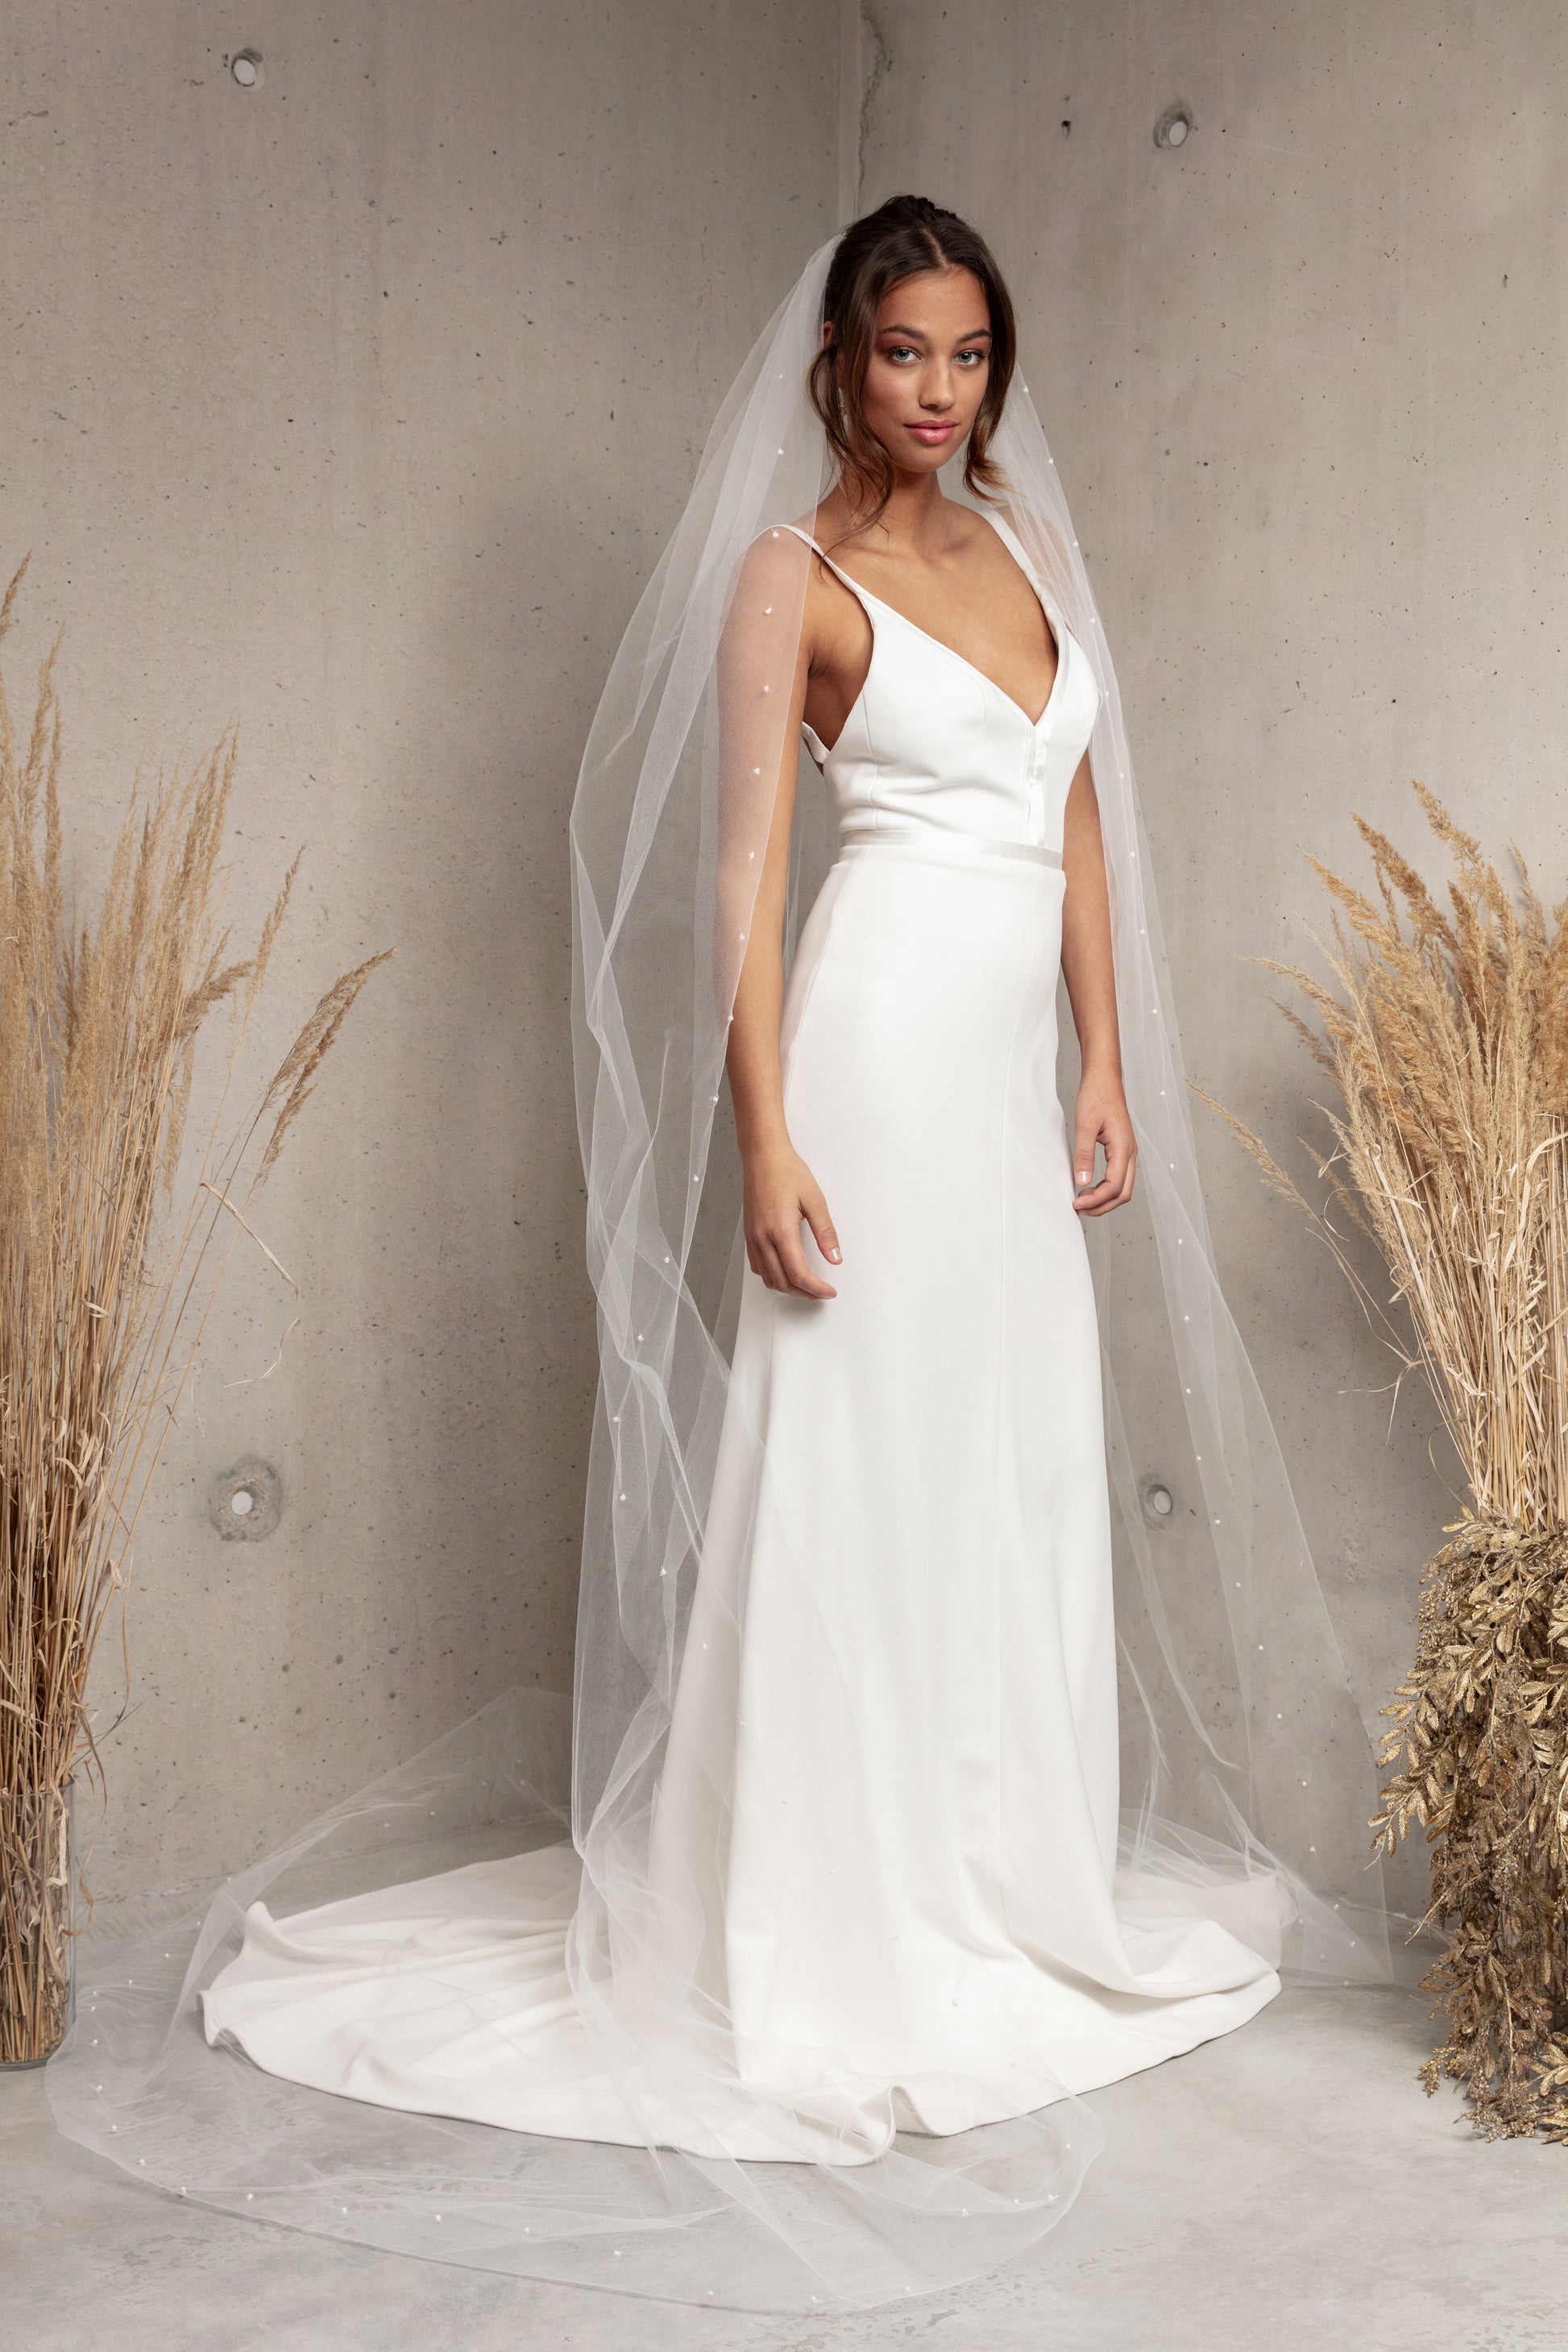 Complete your wedding look with our simply elegant MAJA VEIL. This classic piece features a delicately placed pearl edge in a linear pattern finished with voluminous gathering at the crown. Make a statement in the popular cathedral length or choose from shoulder, elbow, fingertip, floor, chapel, and royal lengths..